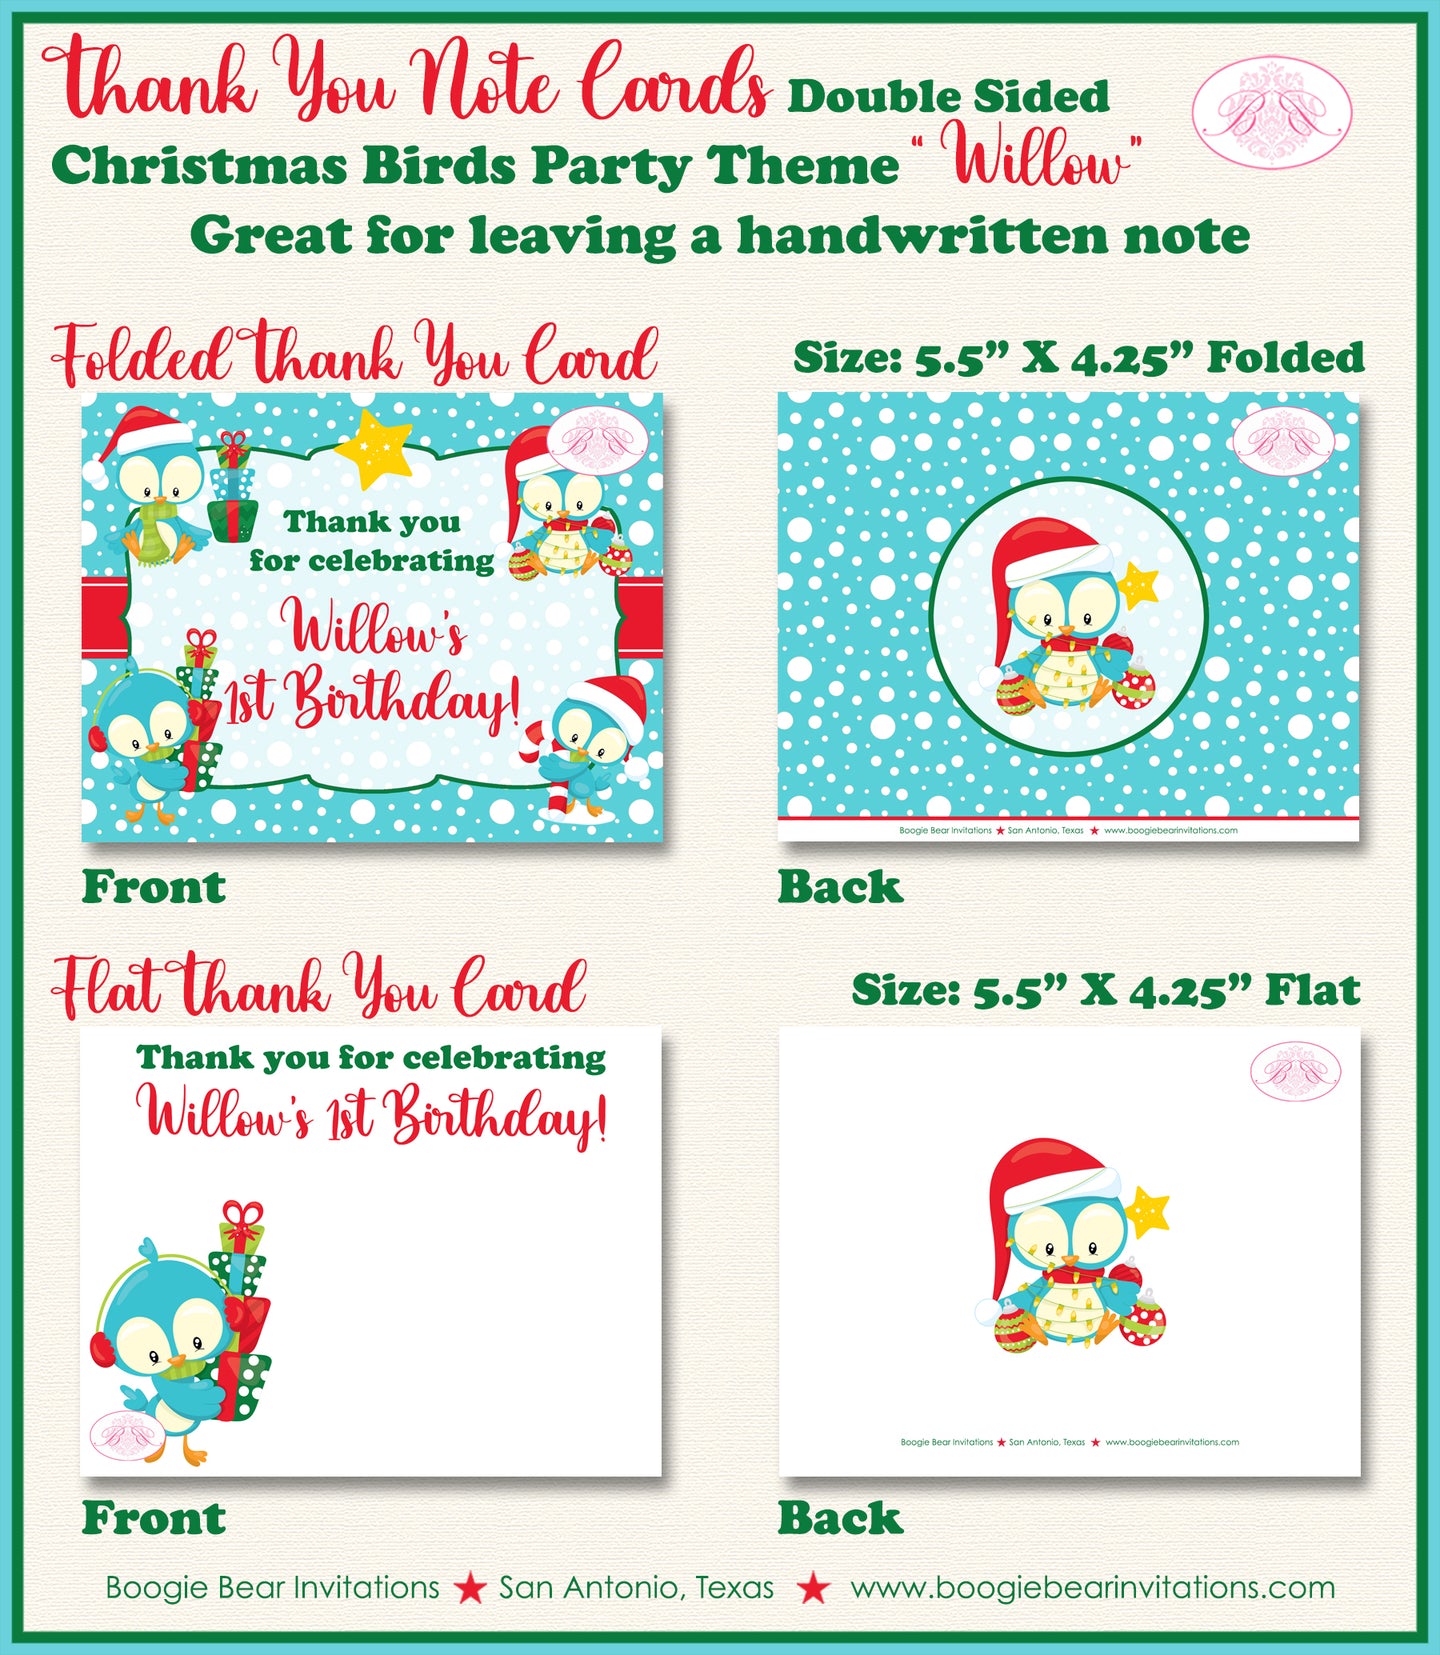 Christmas Birds Party Thank You Cards Birthday Winter Woodland Boogie Bear Invitations Willow Theme Printed